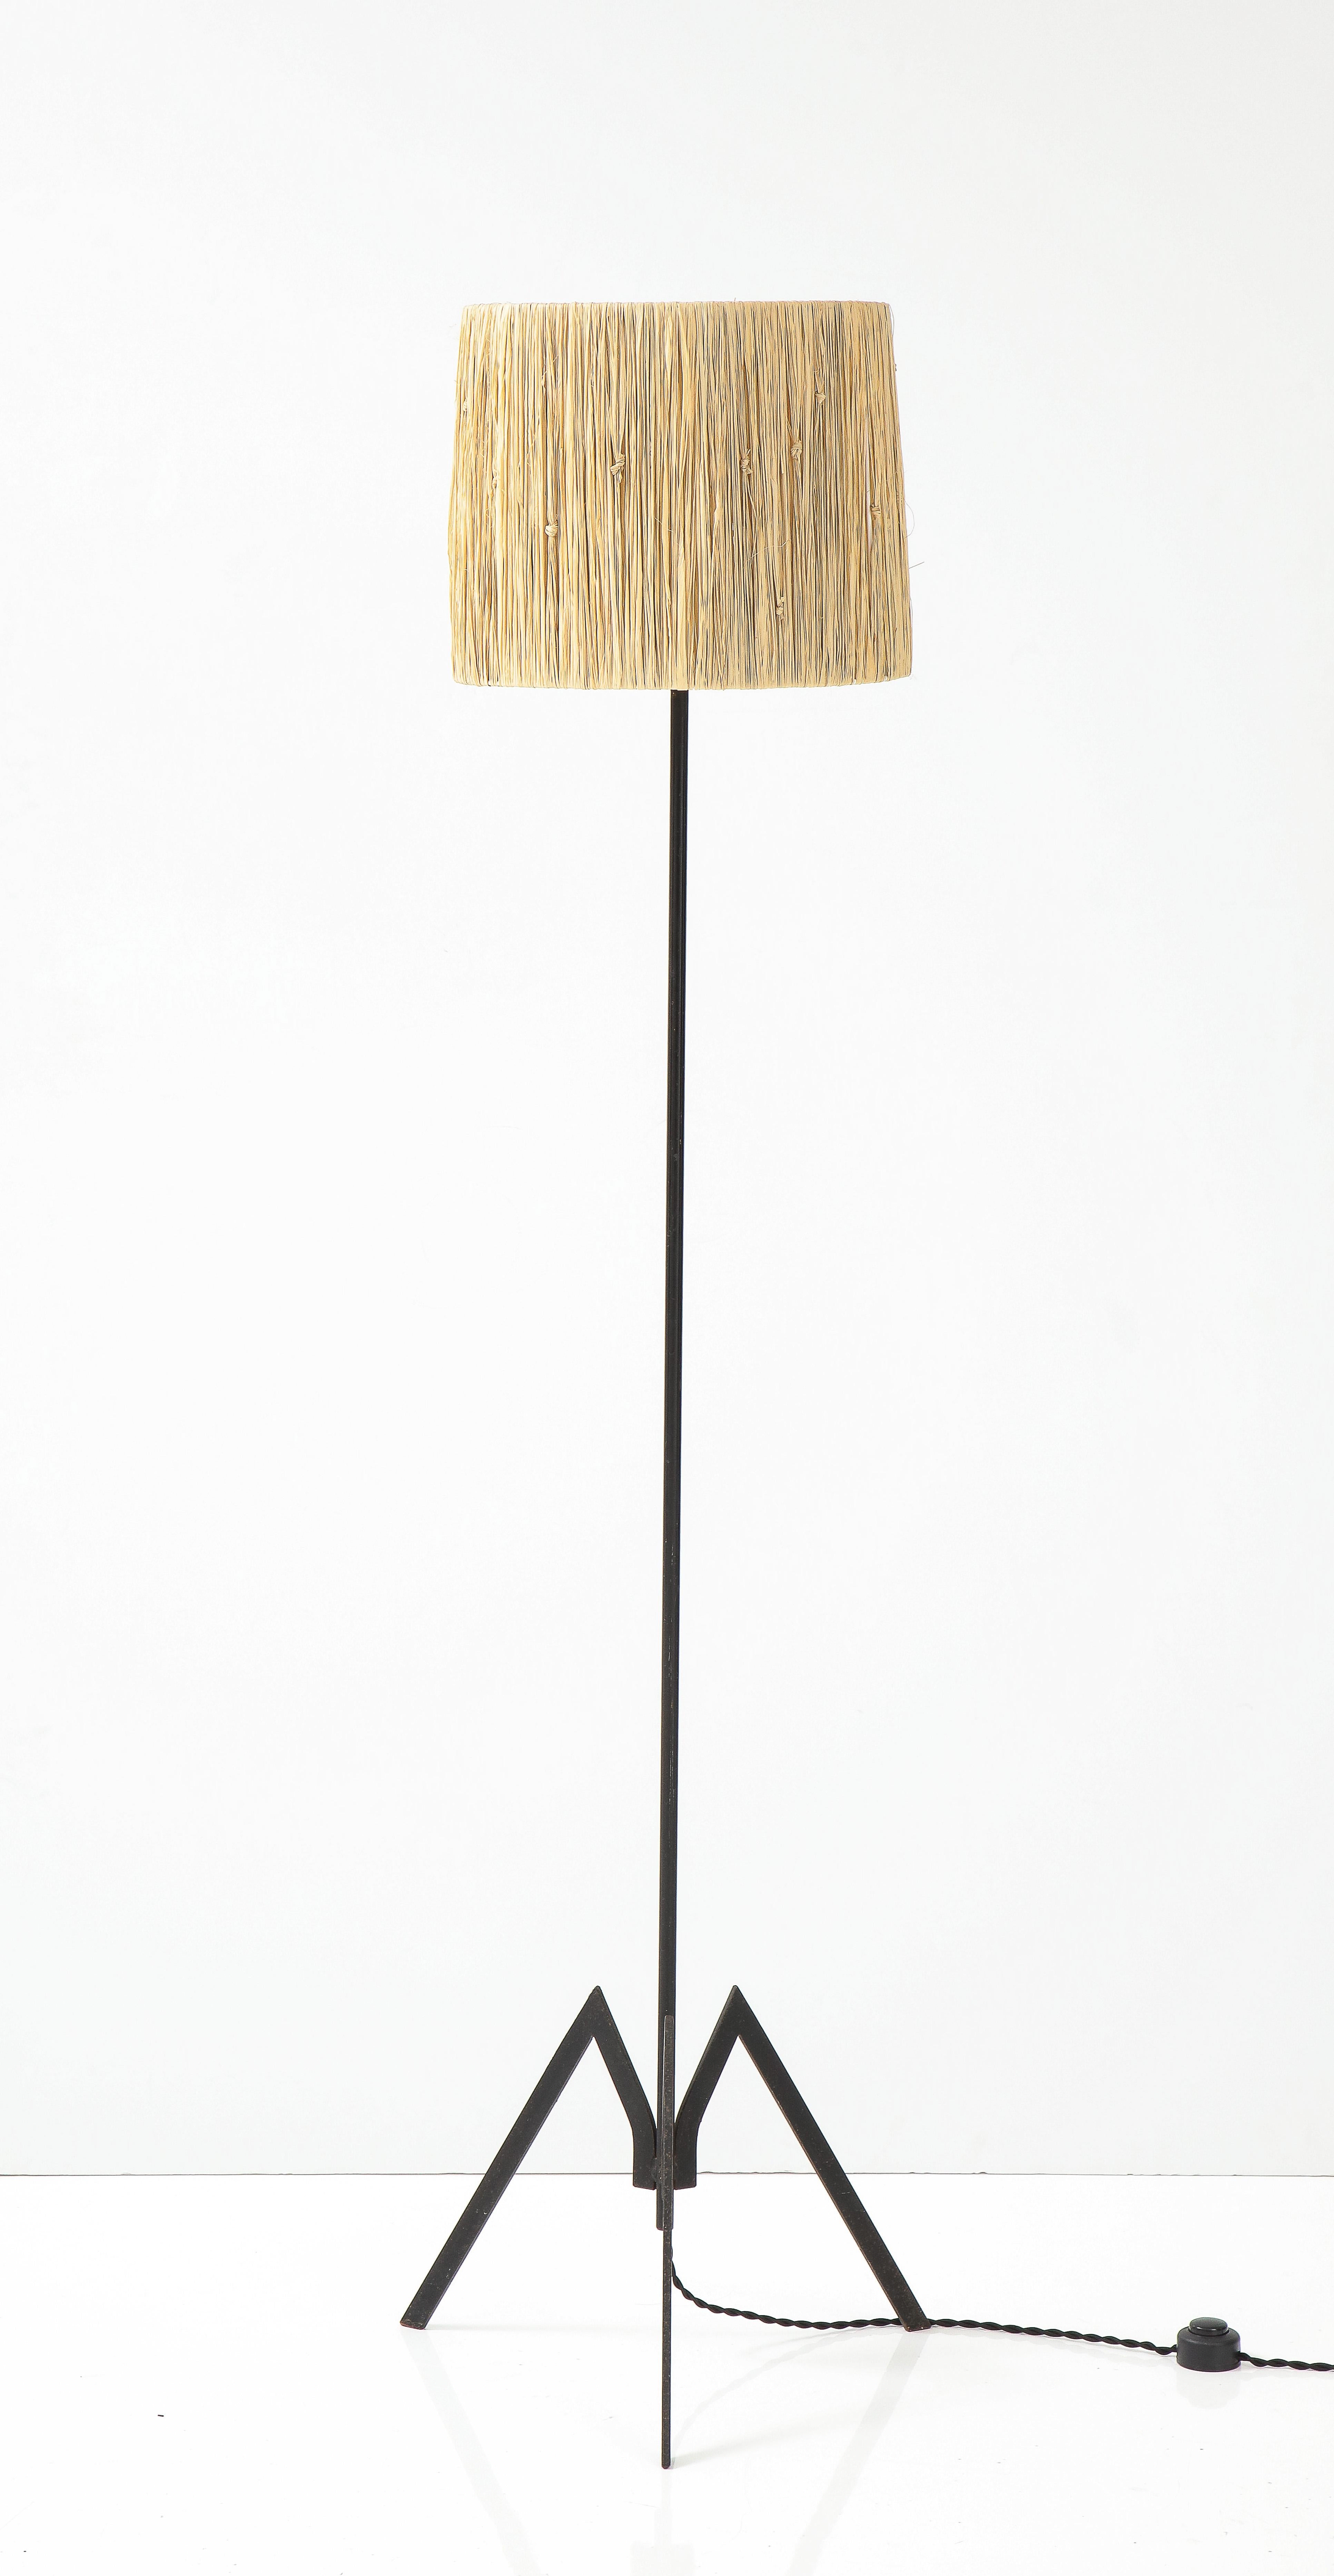 Mid-20th Century French Modernist Iron Floor Lamp with Raffia Shade, France, c. 1950's